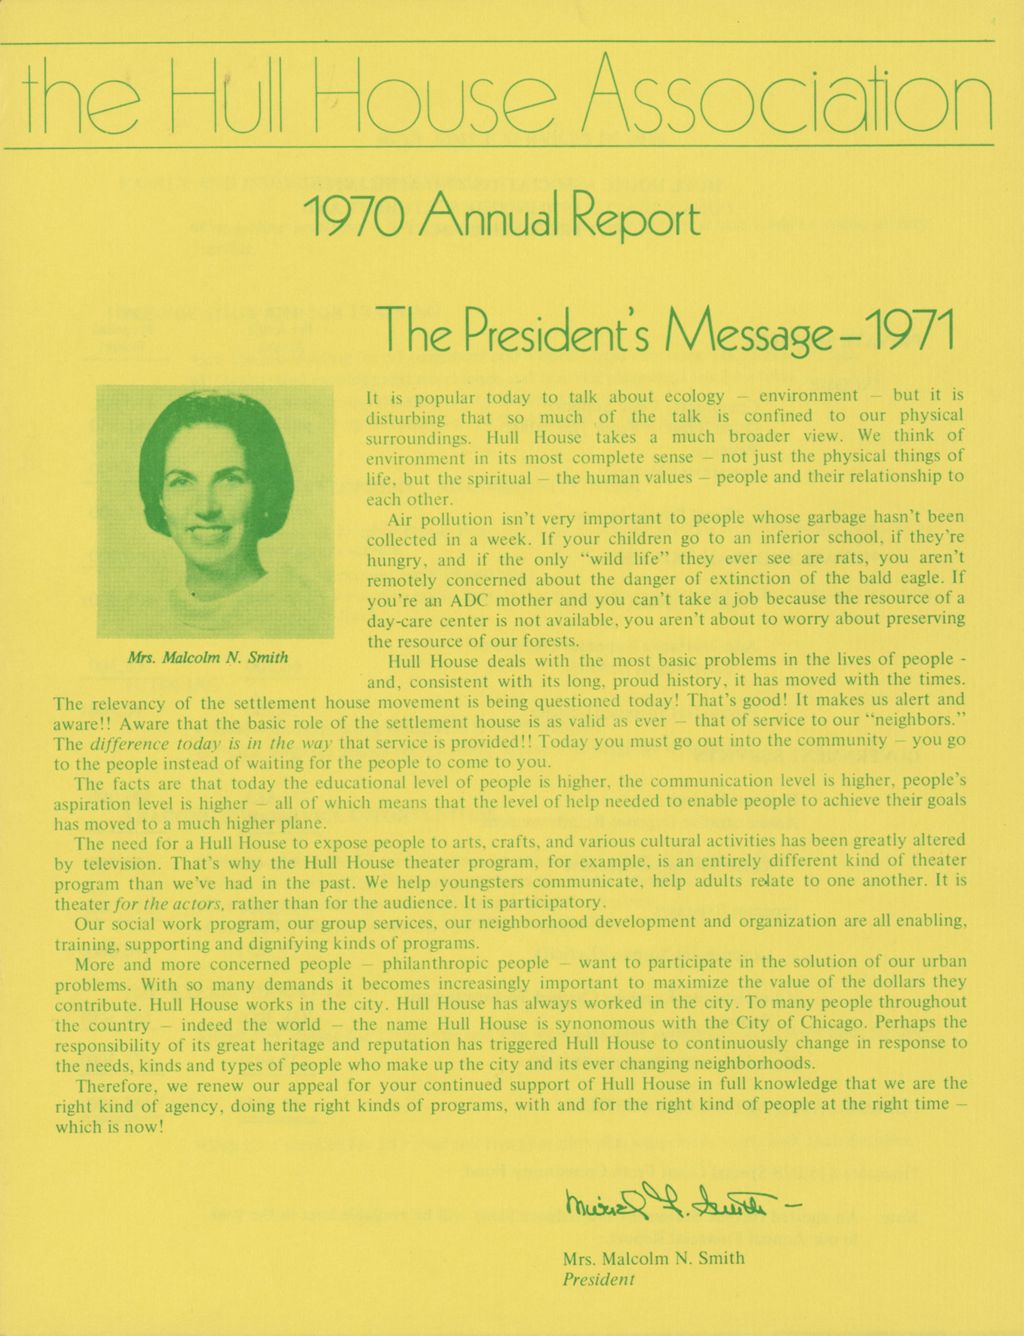 Hull House Association, Annual Report, 1970